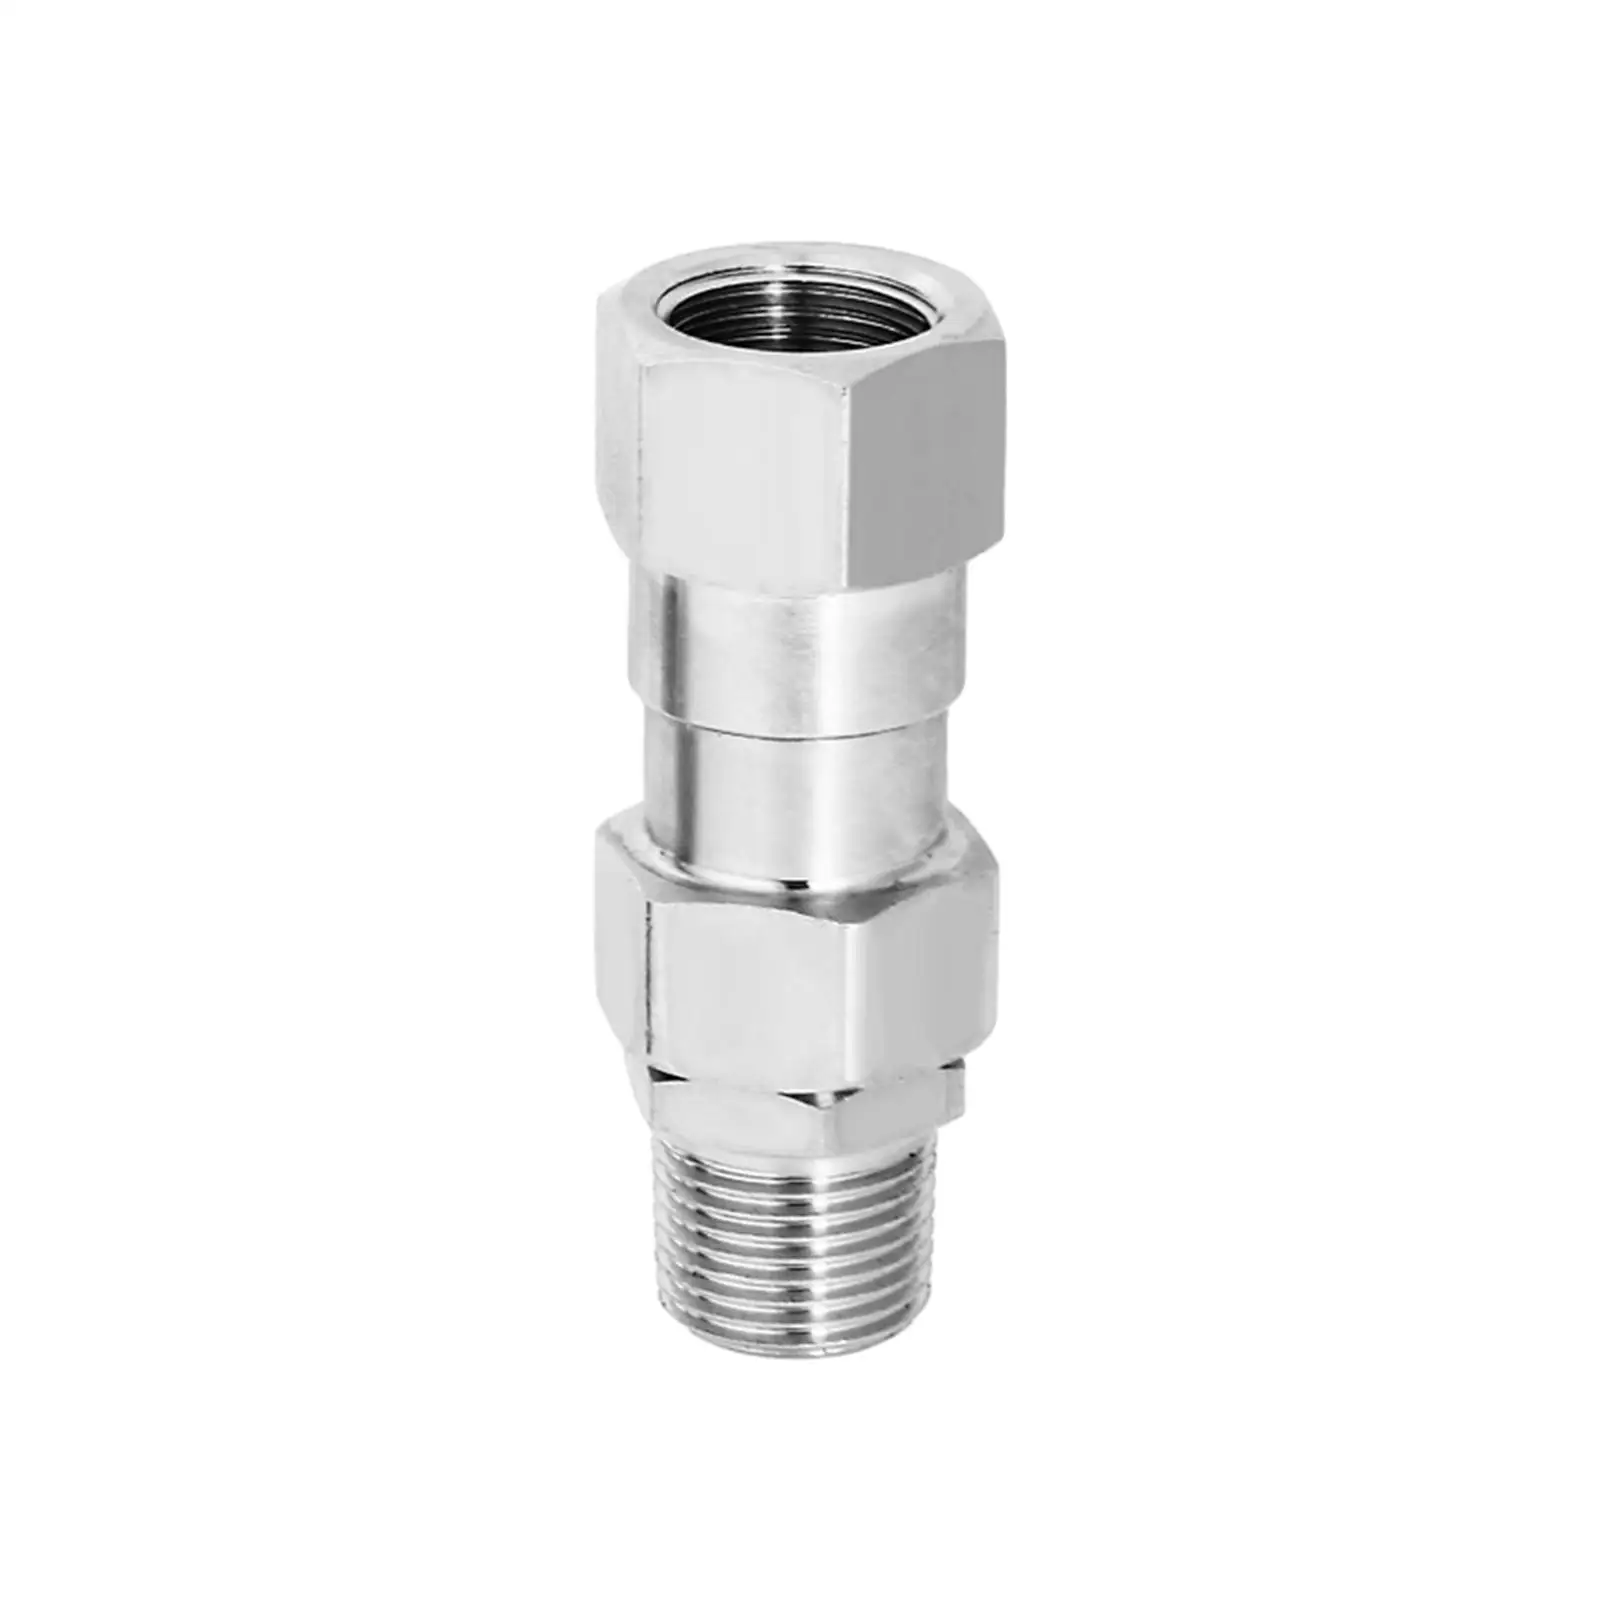 Pressure Washer Adapter Durable Garden Hose Fitting Quick Connect Rustproof Cleaning Nozzle Pipe Quick Release Universal Adapter